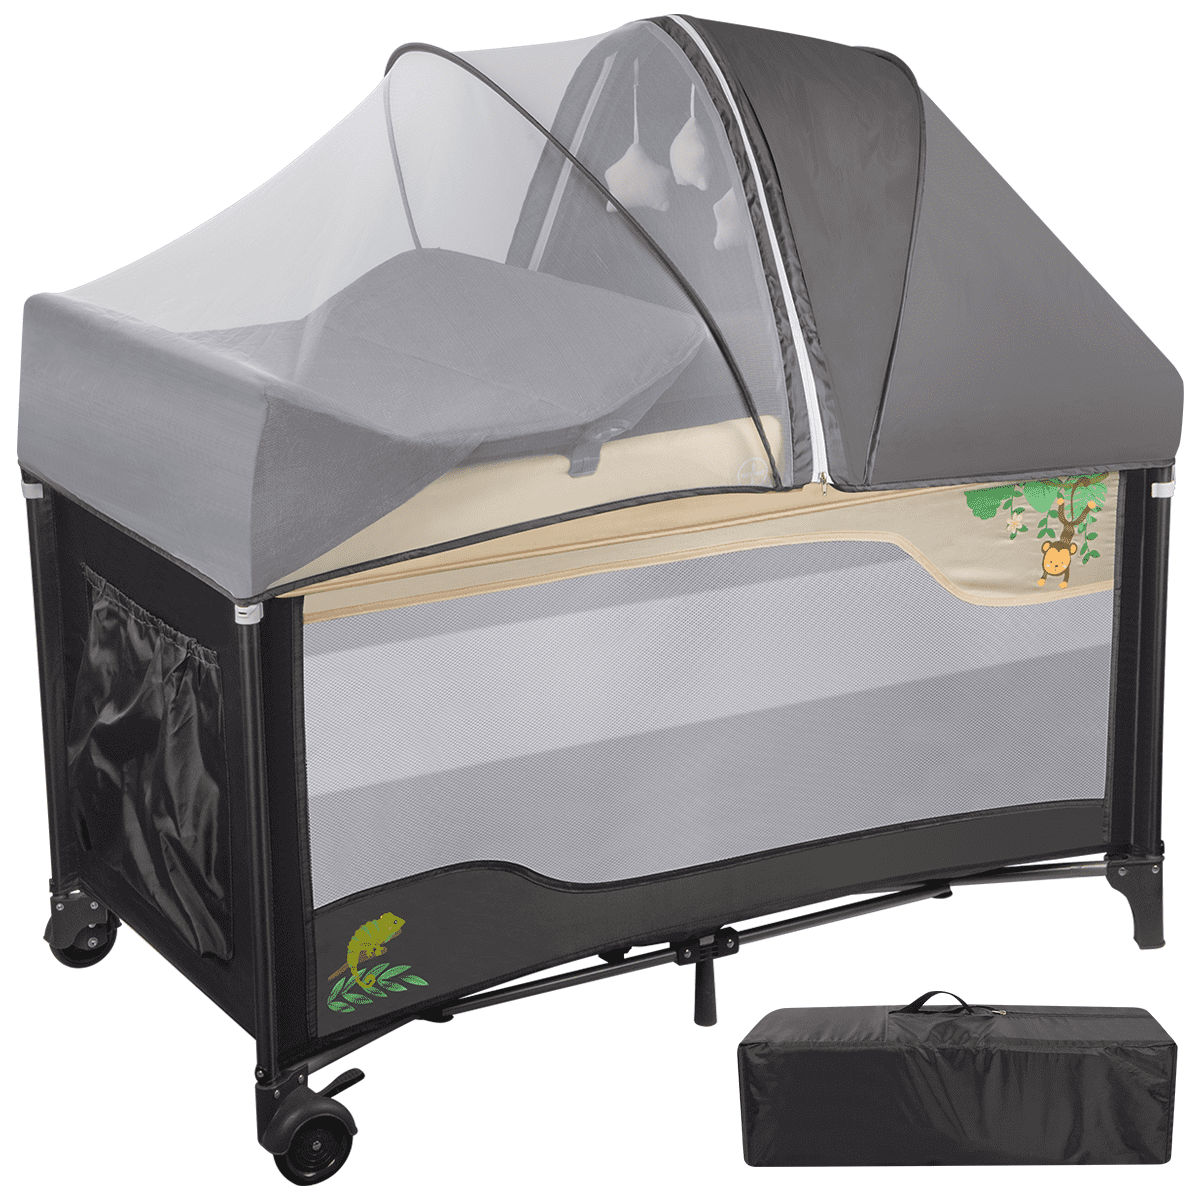 Dreambaby Royale 3-in-1 Converta Play-Yard, Wide Adjusta-Gate and